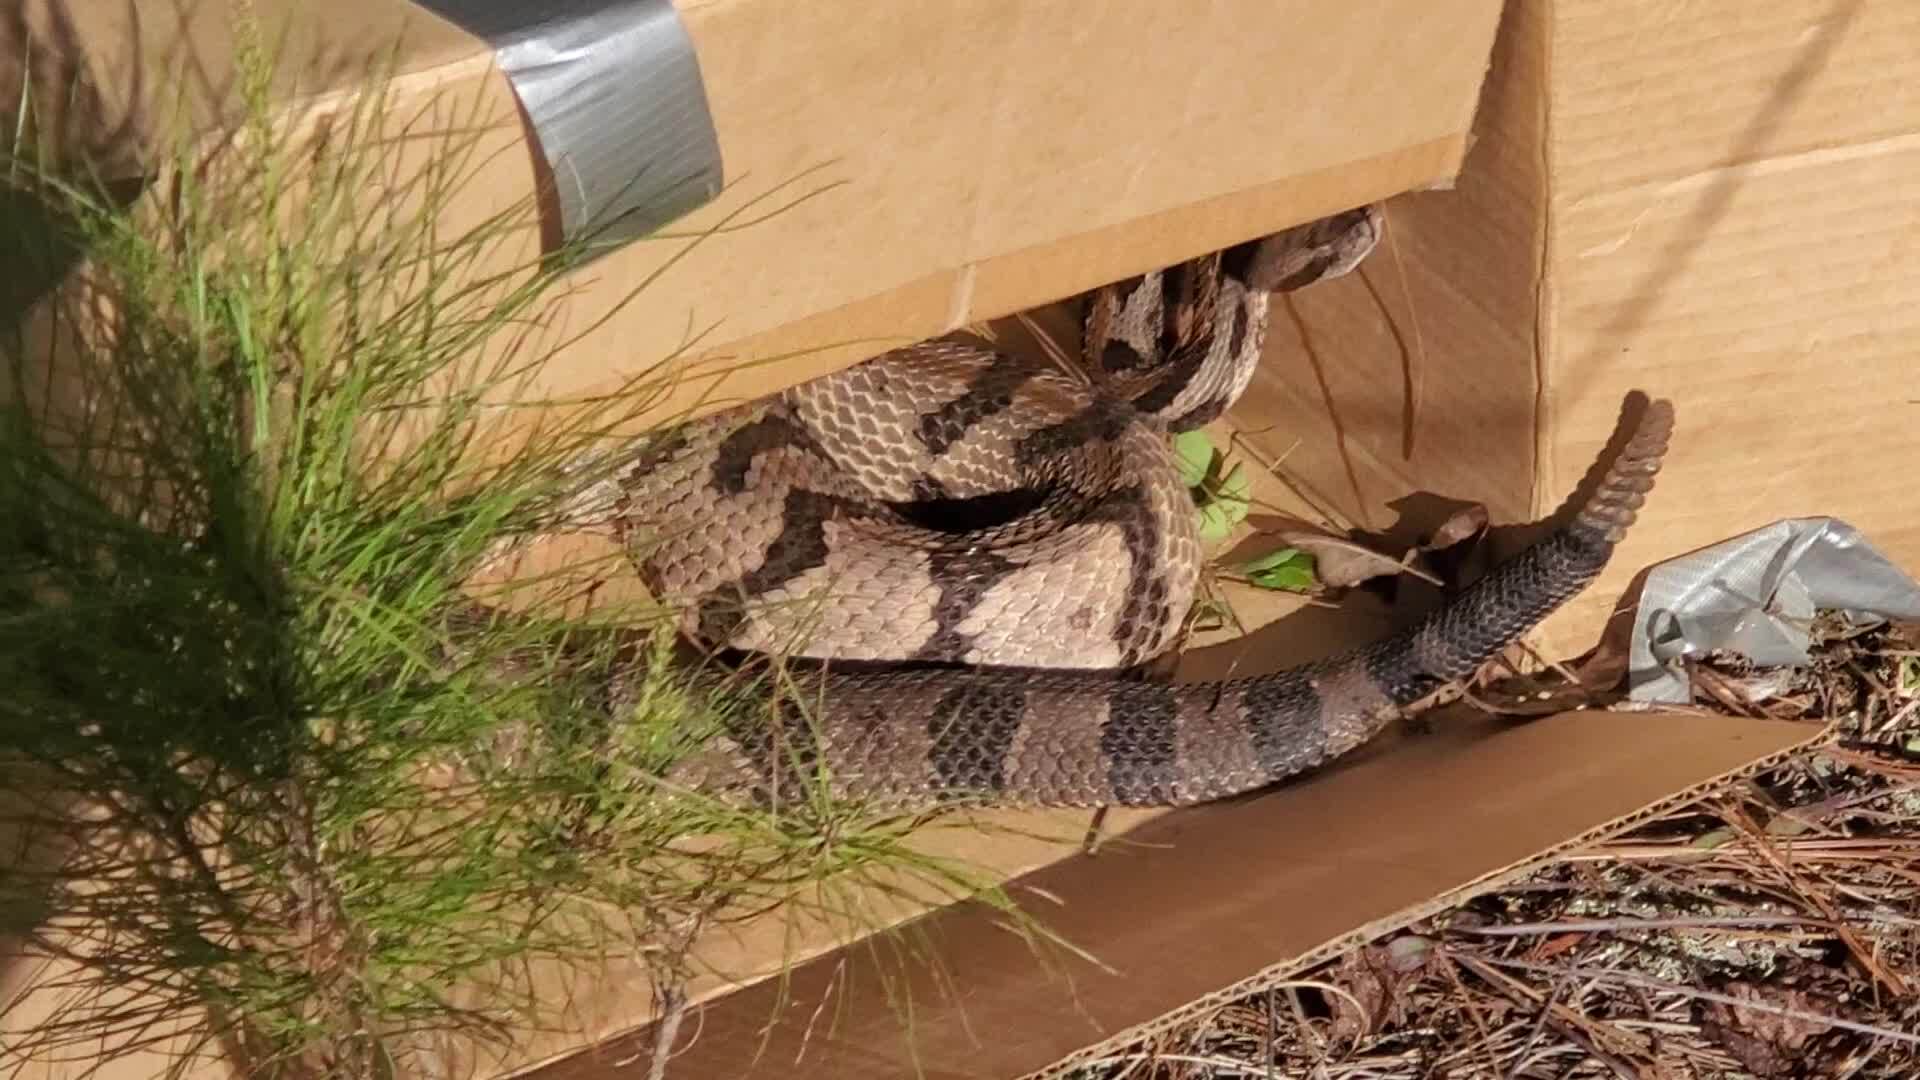 Movie: Snake won't come out of box (5.2M)